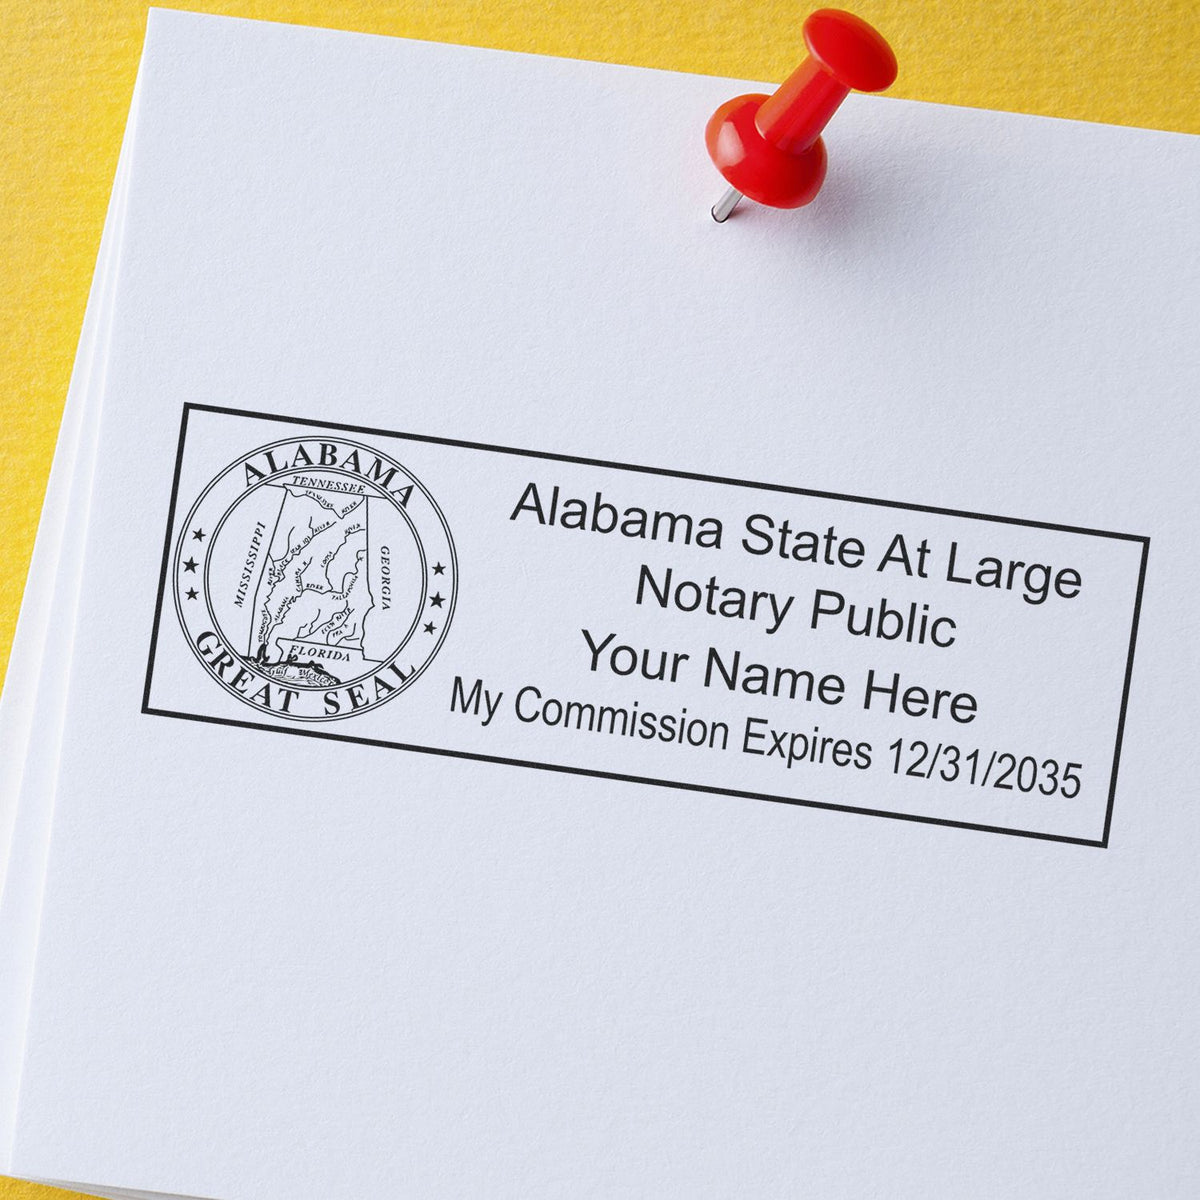 A photograph of the MaxLight Premium Pre-Inked Alabama State Seal Notarial Stamp stamp impression reveals a vivid, professional image of the on paper.